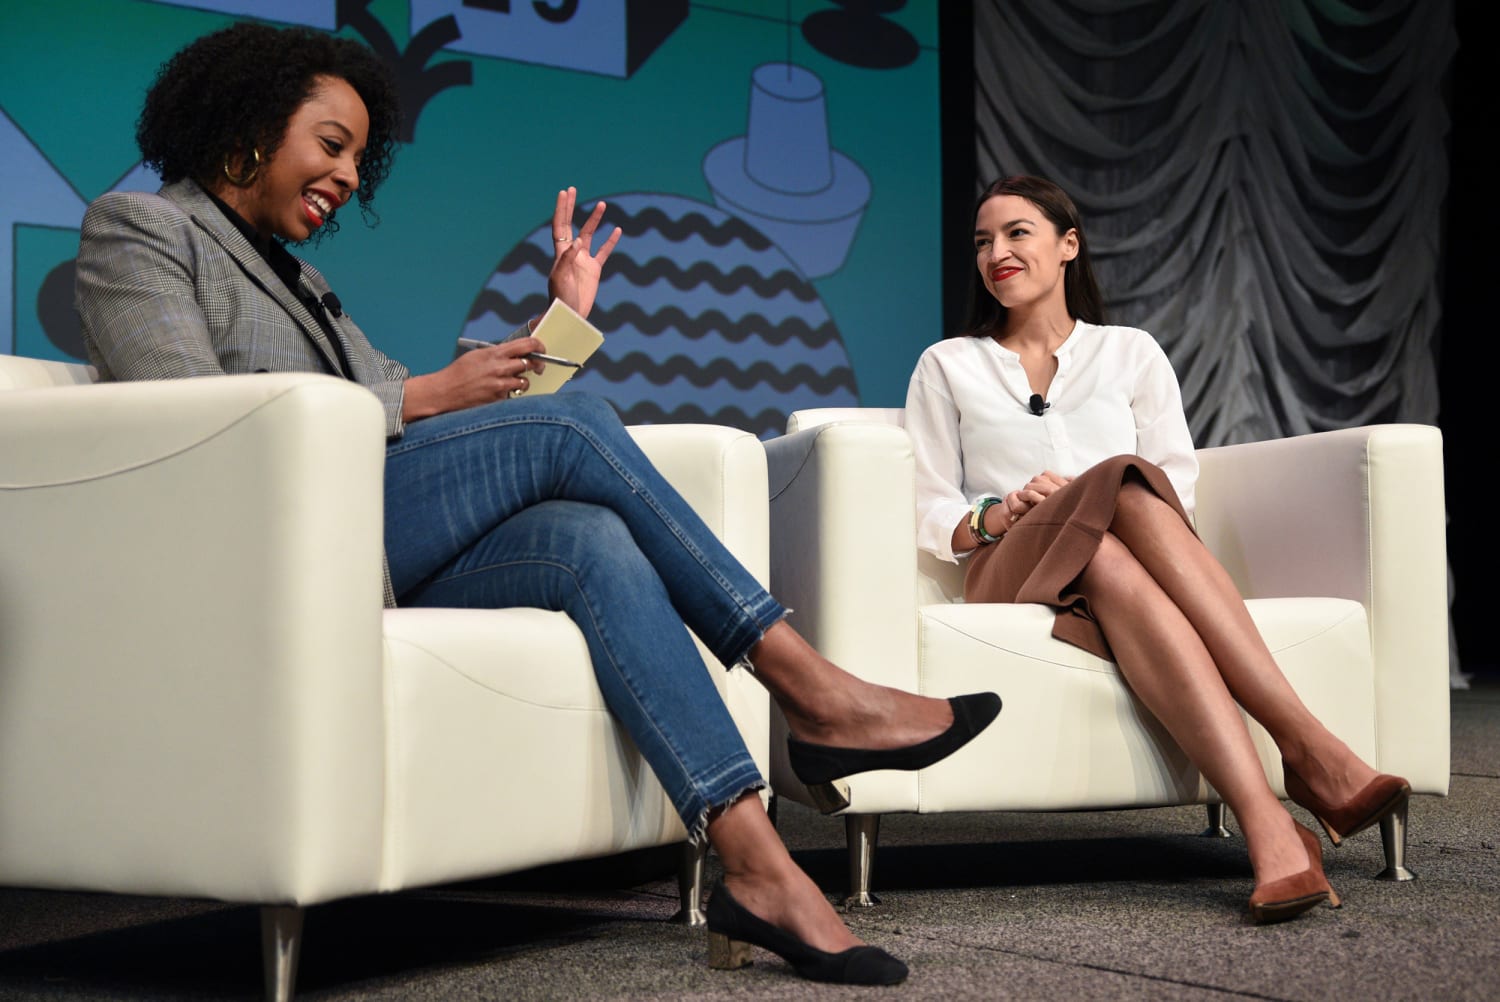 At South by Southwest, the 29-year-old freshman congresswoman drew bigger c...